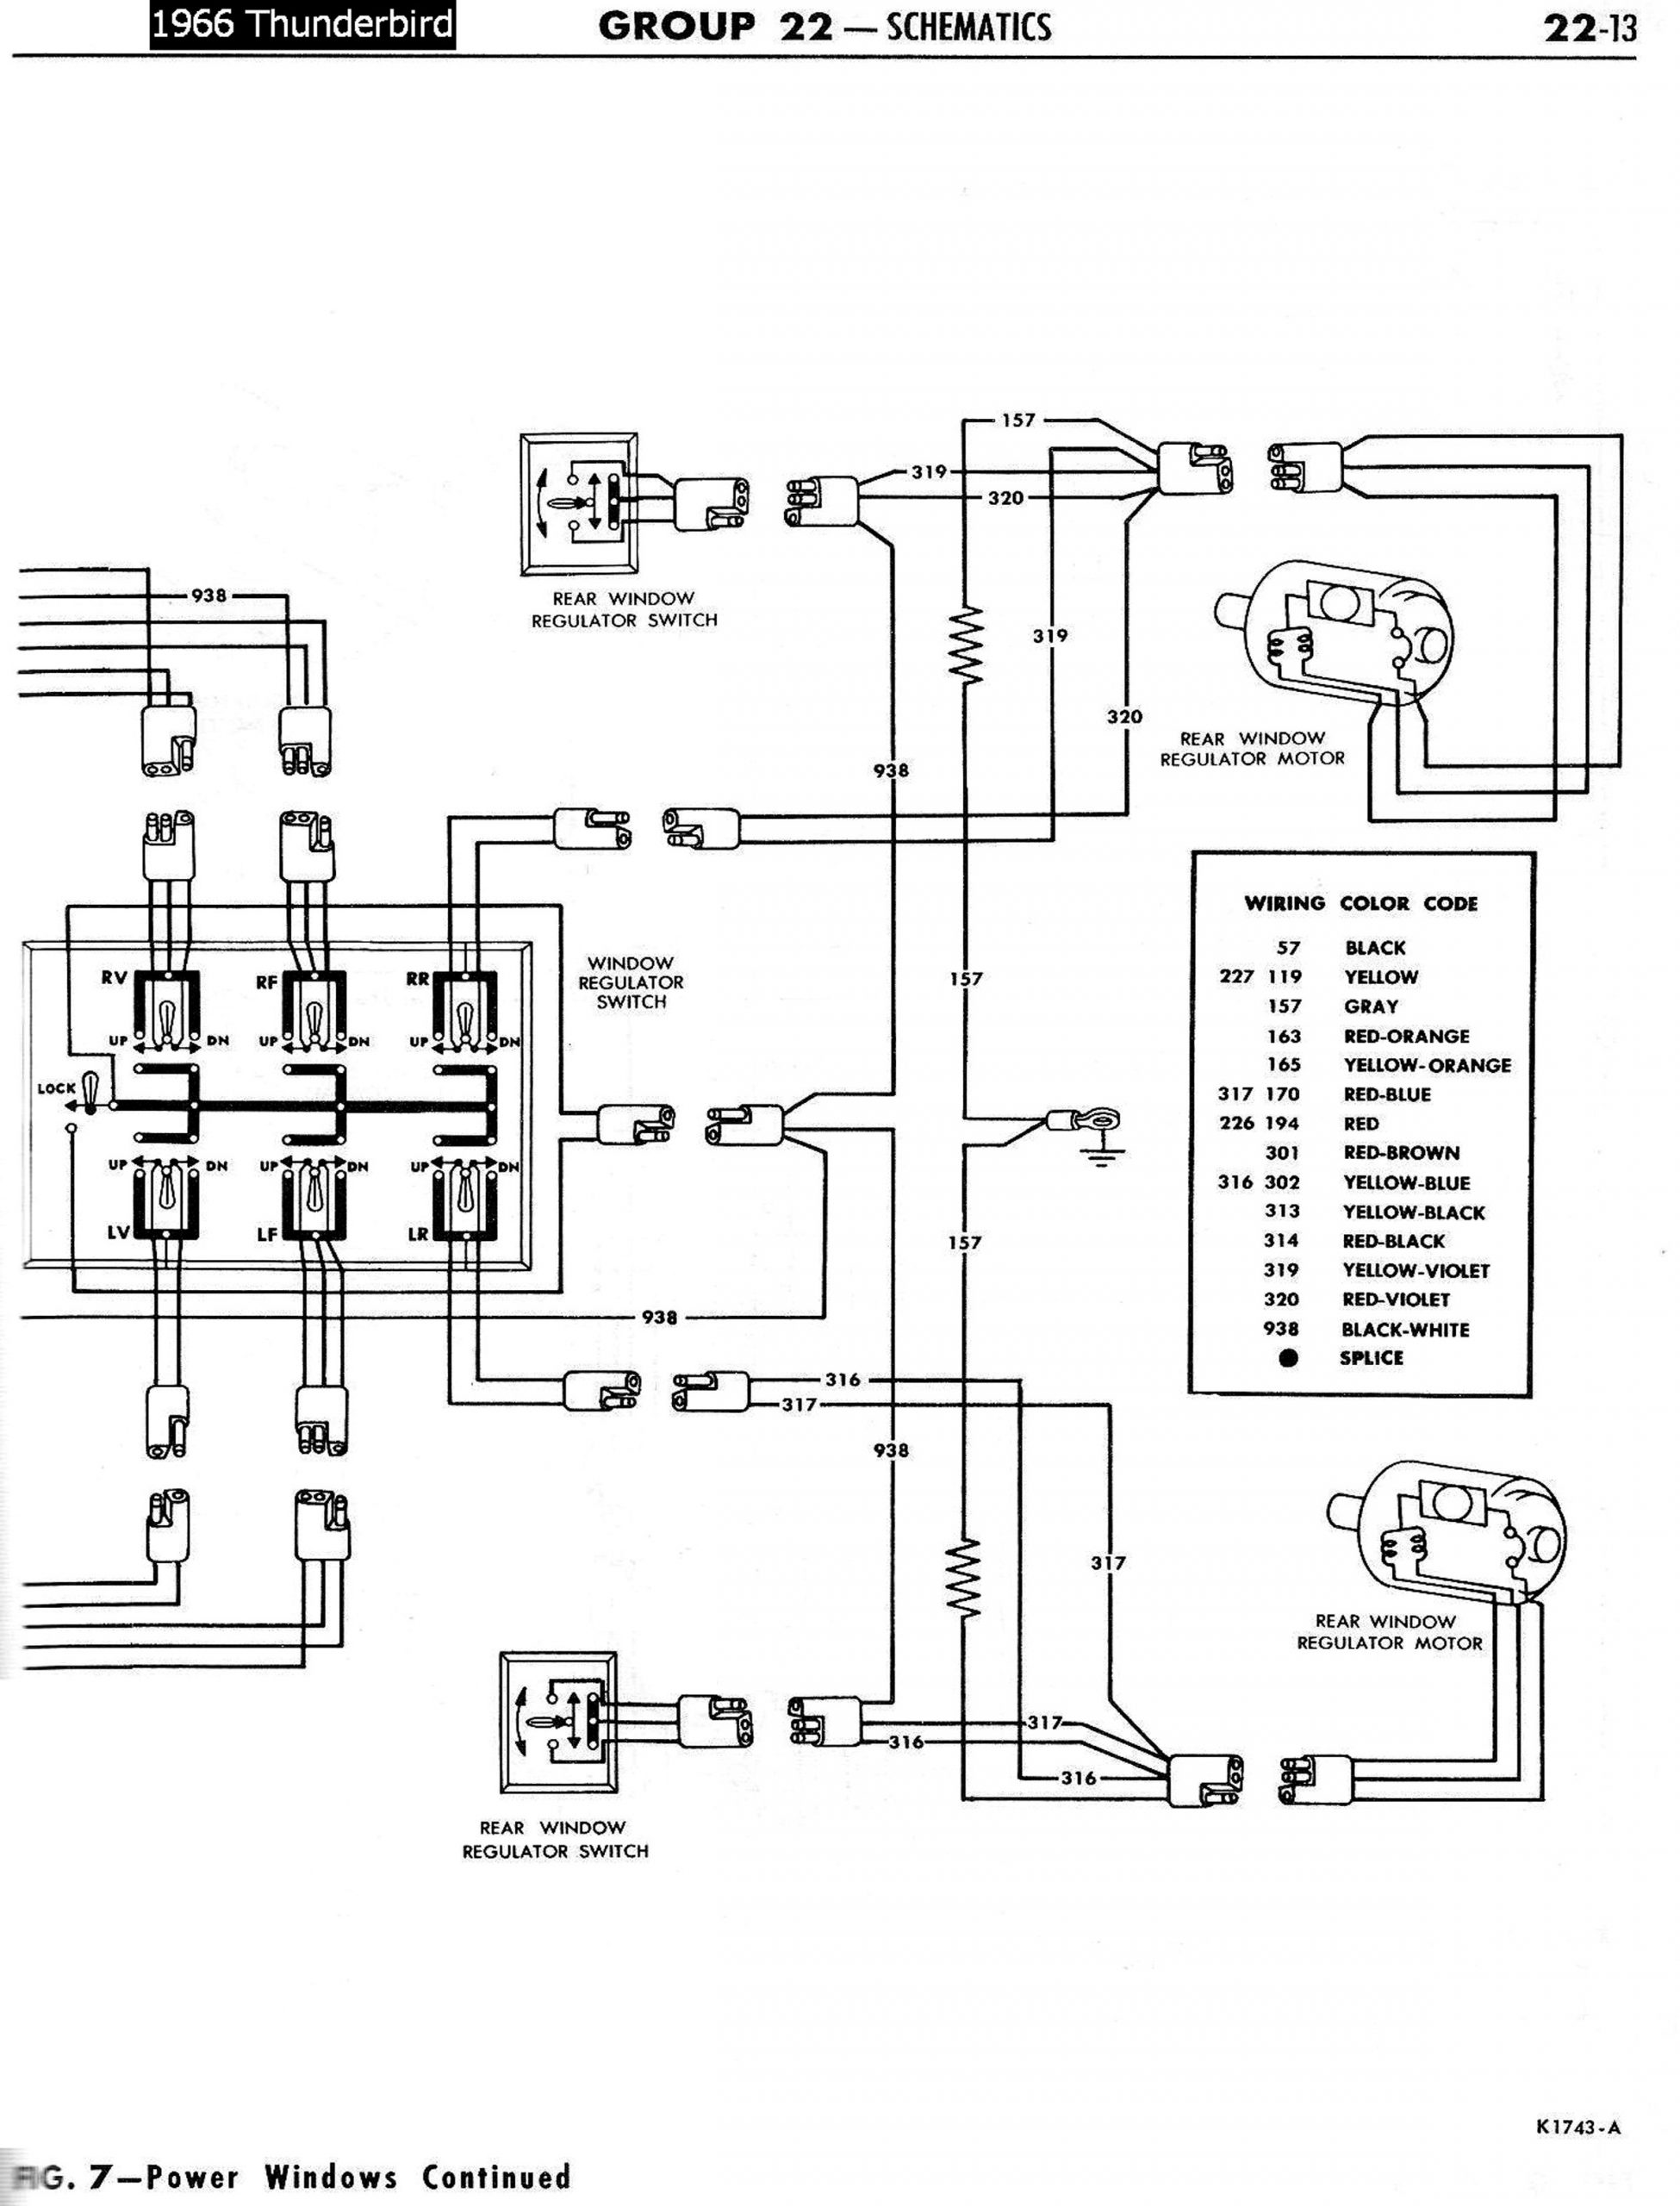 1968 Chevelle Wiring Diagram Free 1958-68 ford Electrical Schematics Of 1968 Chevelle Wiring Diagram Free